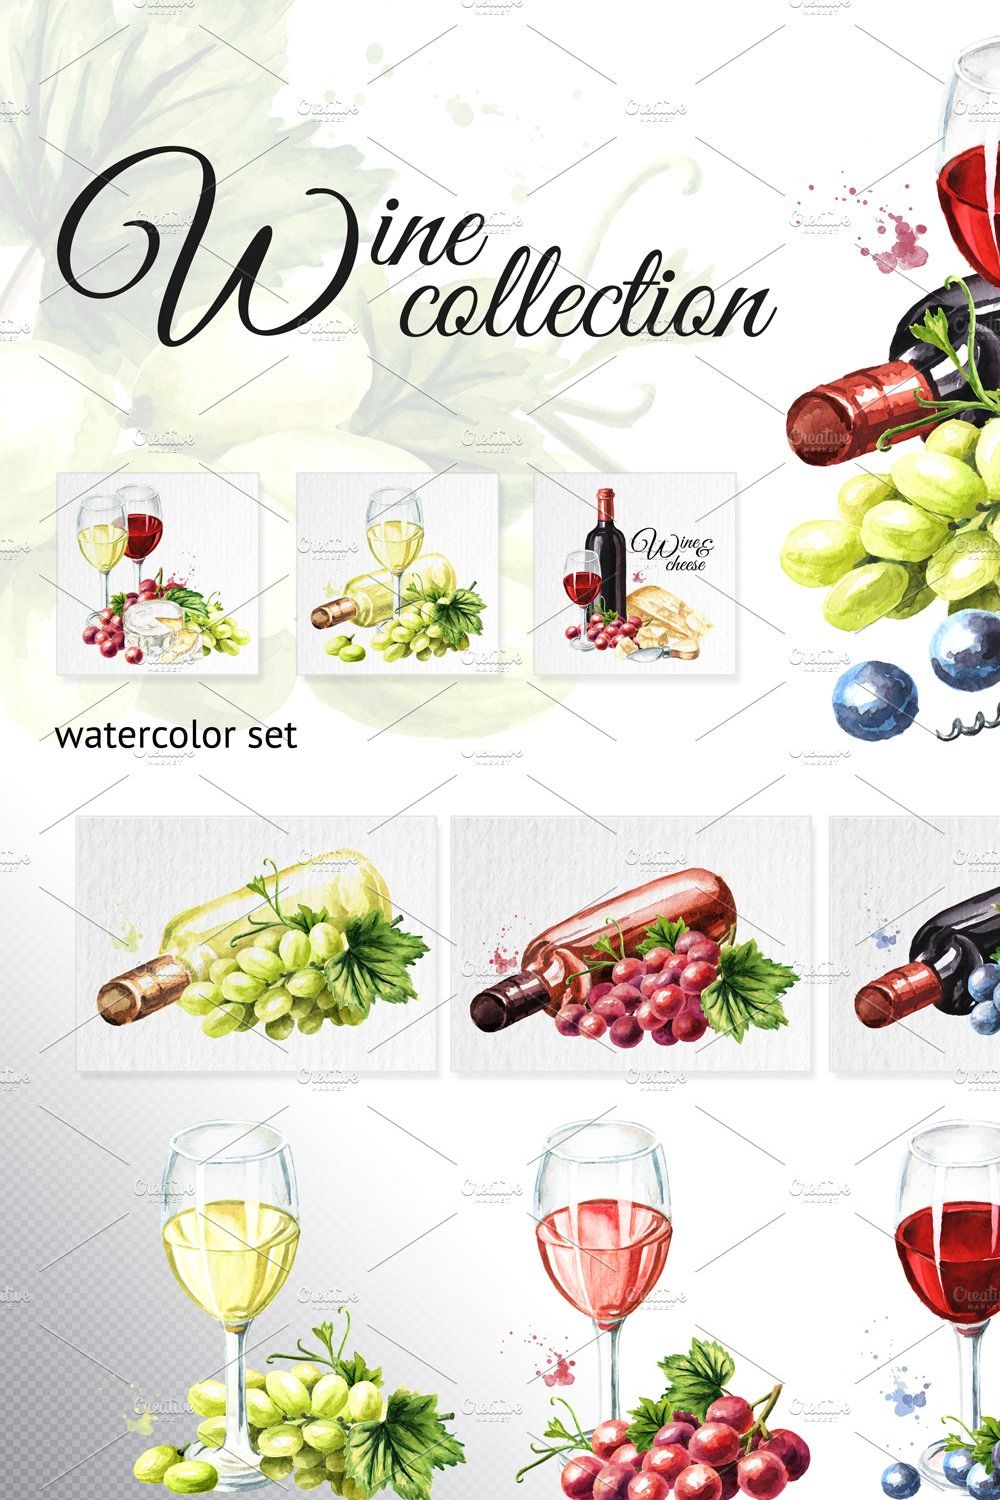 Wine collection pinterest preview image.